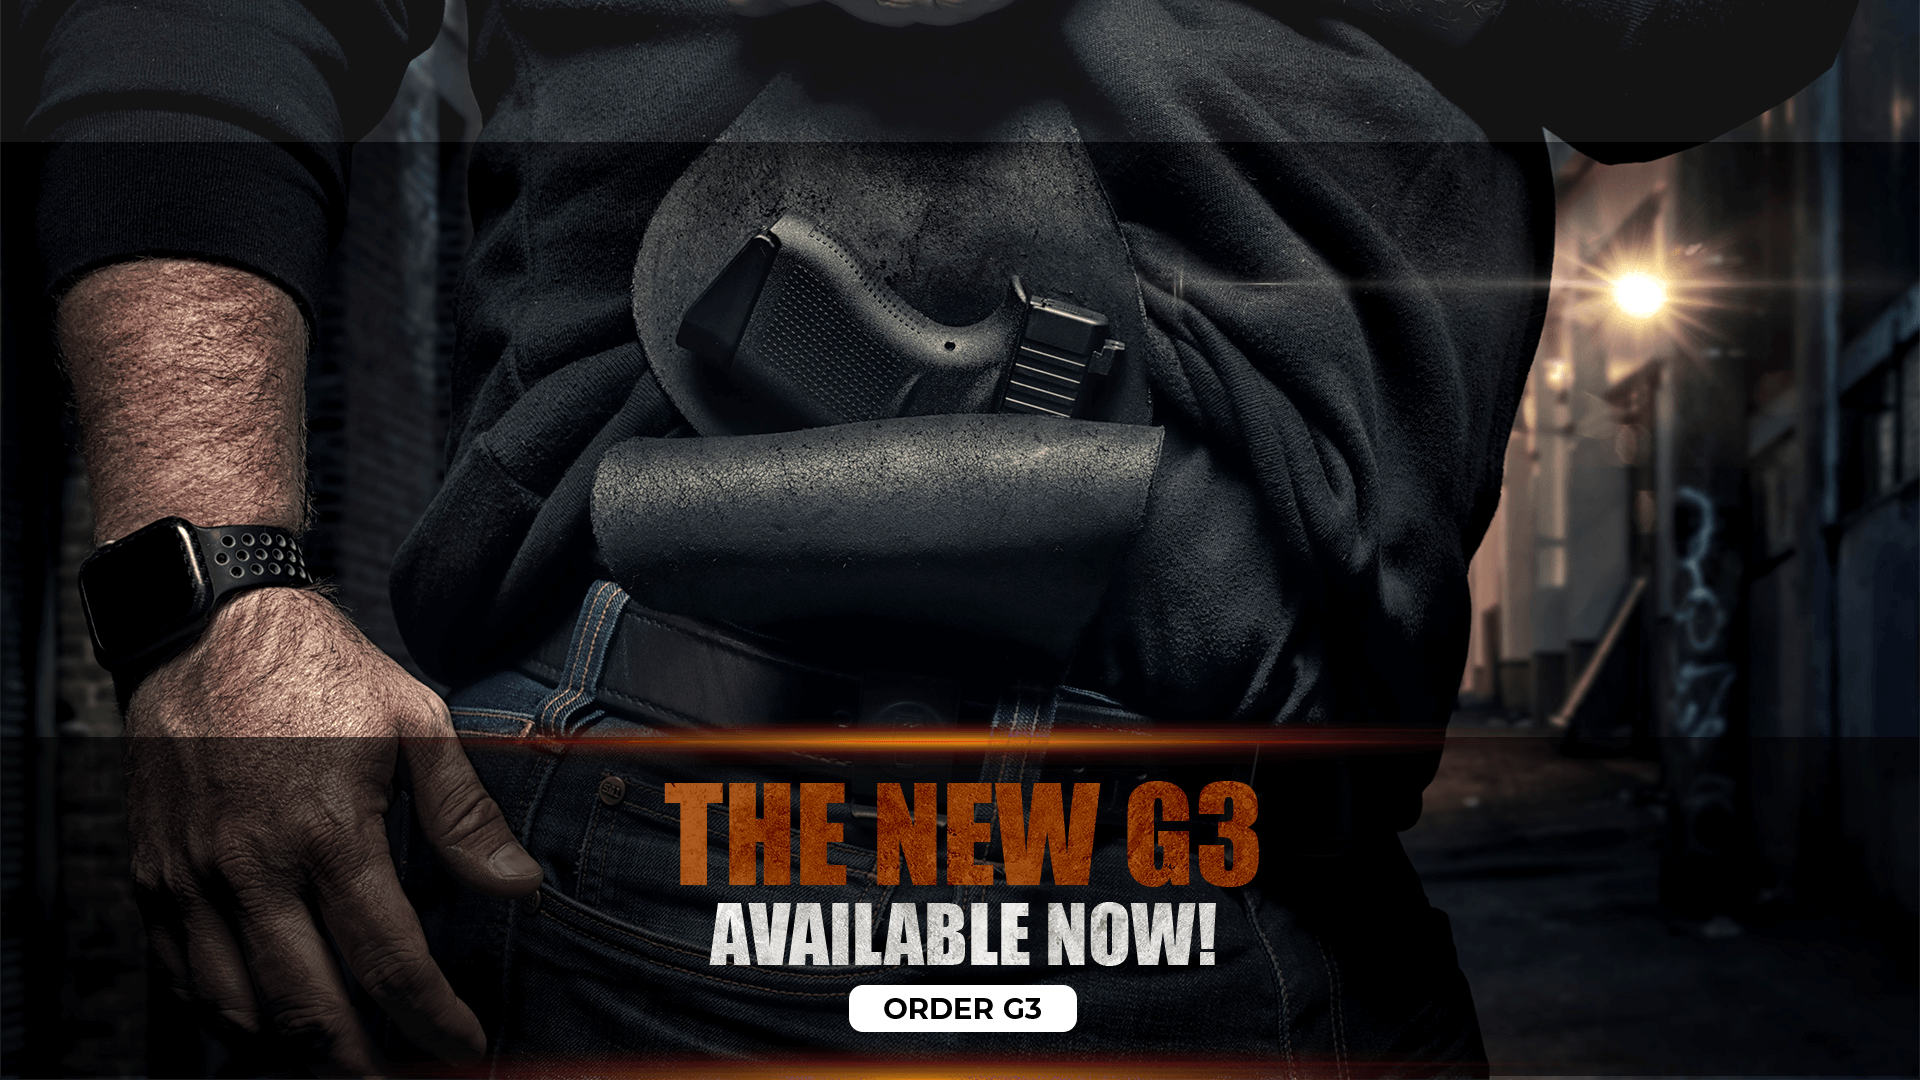 The New G3 Available Now!